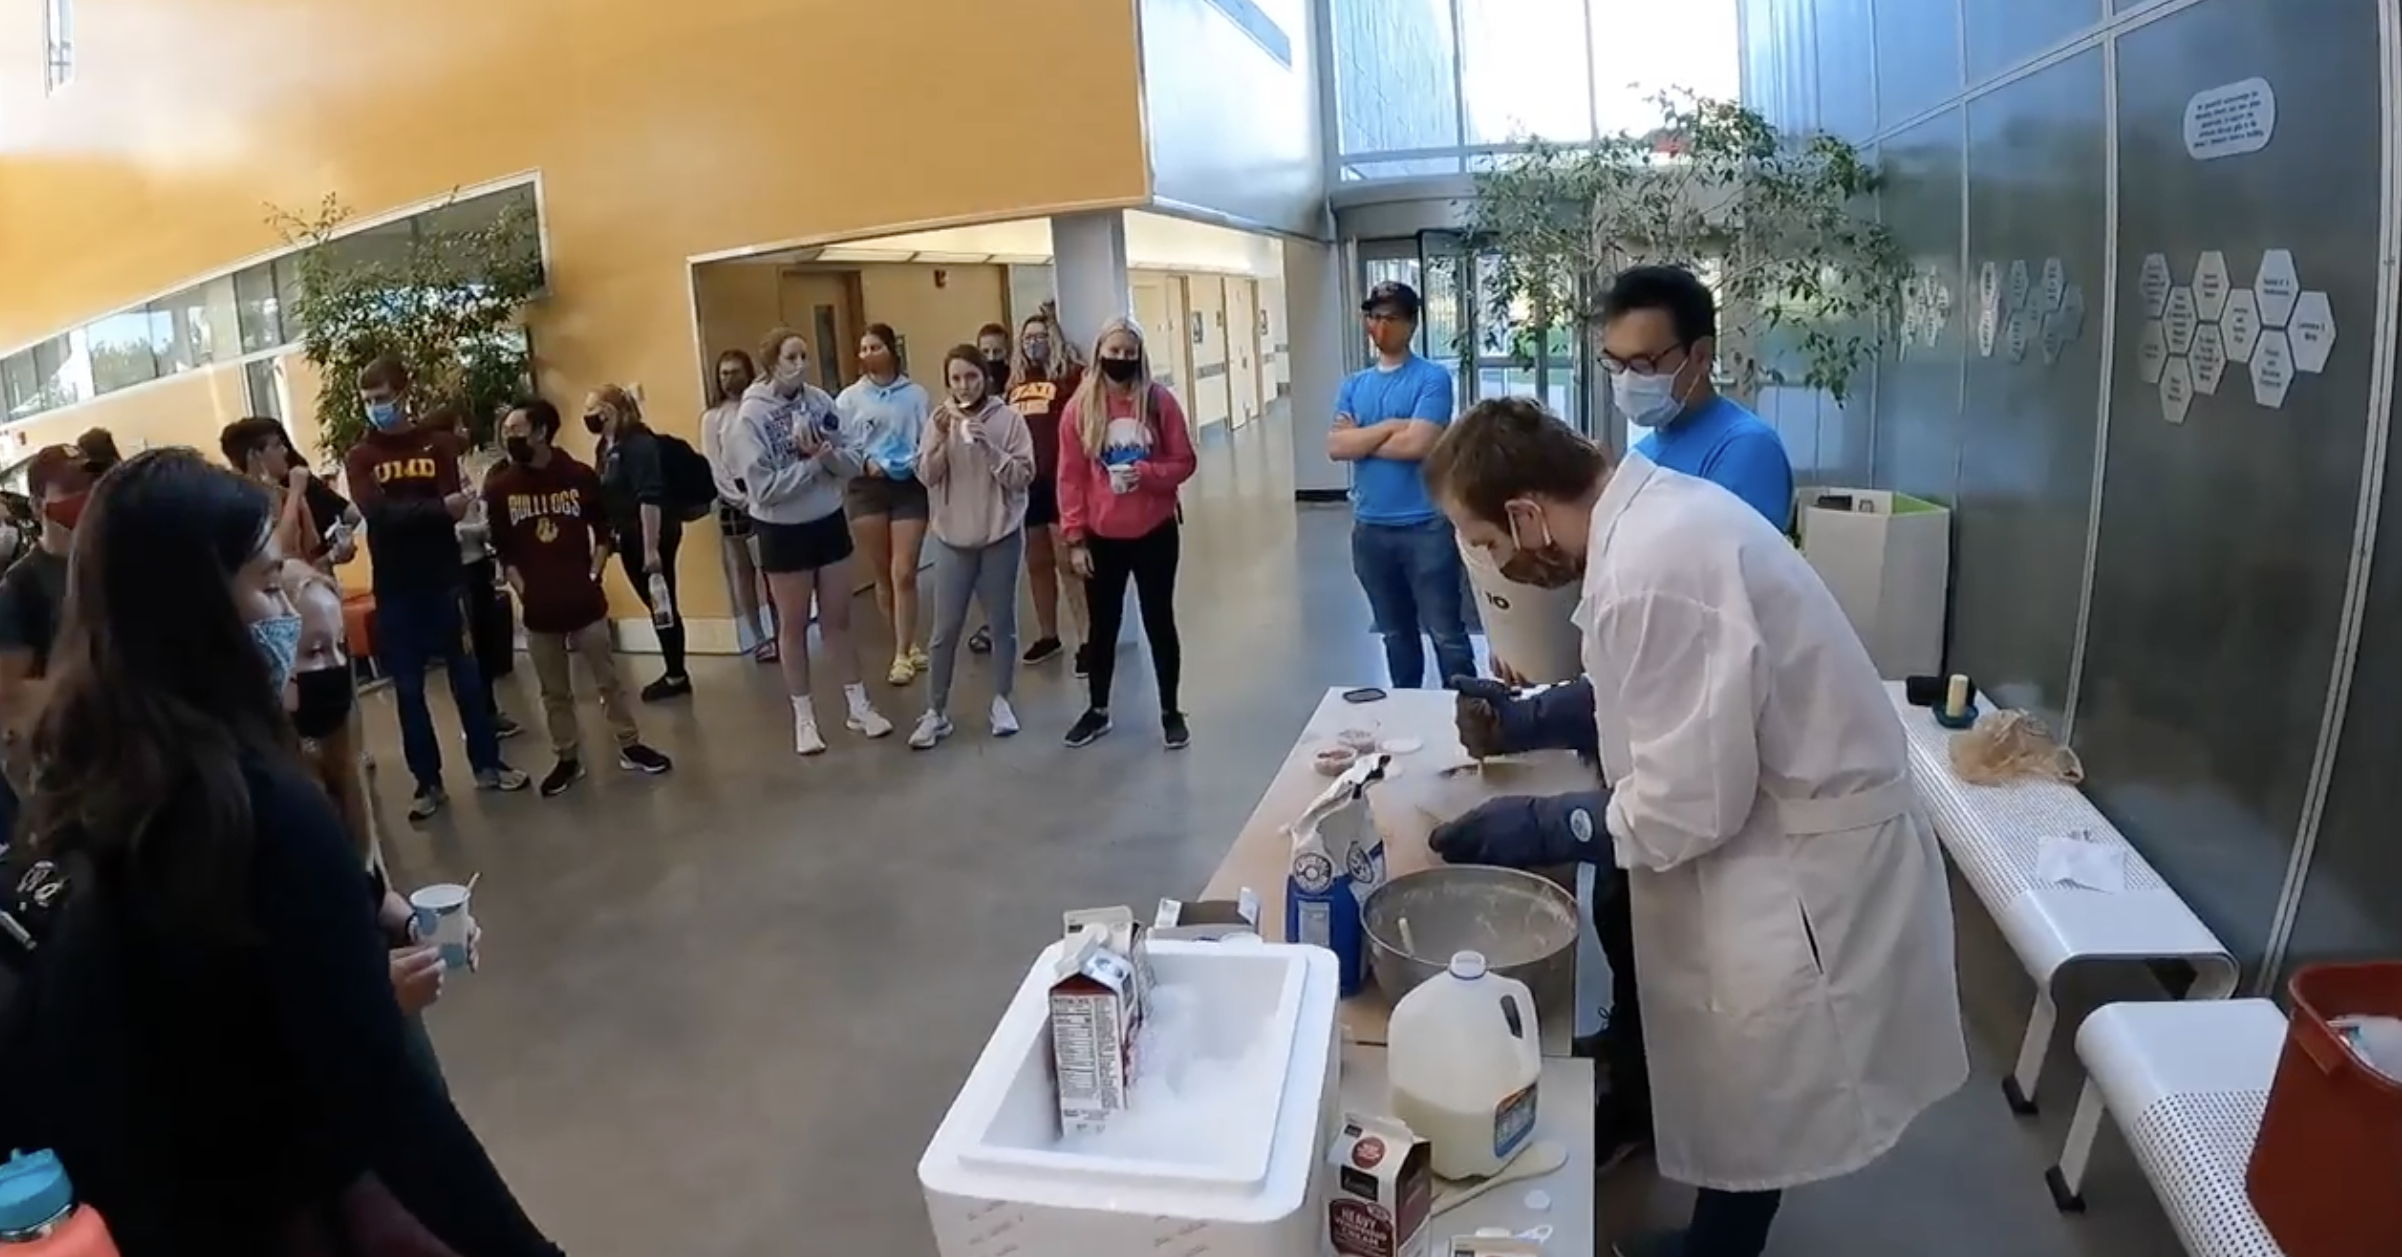 The Chemistry Club hosts a liquid N2 ice cream event with 100+ student attendees.